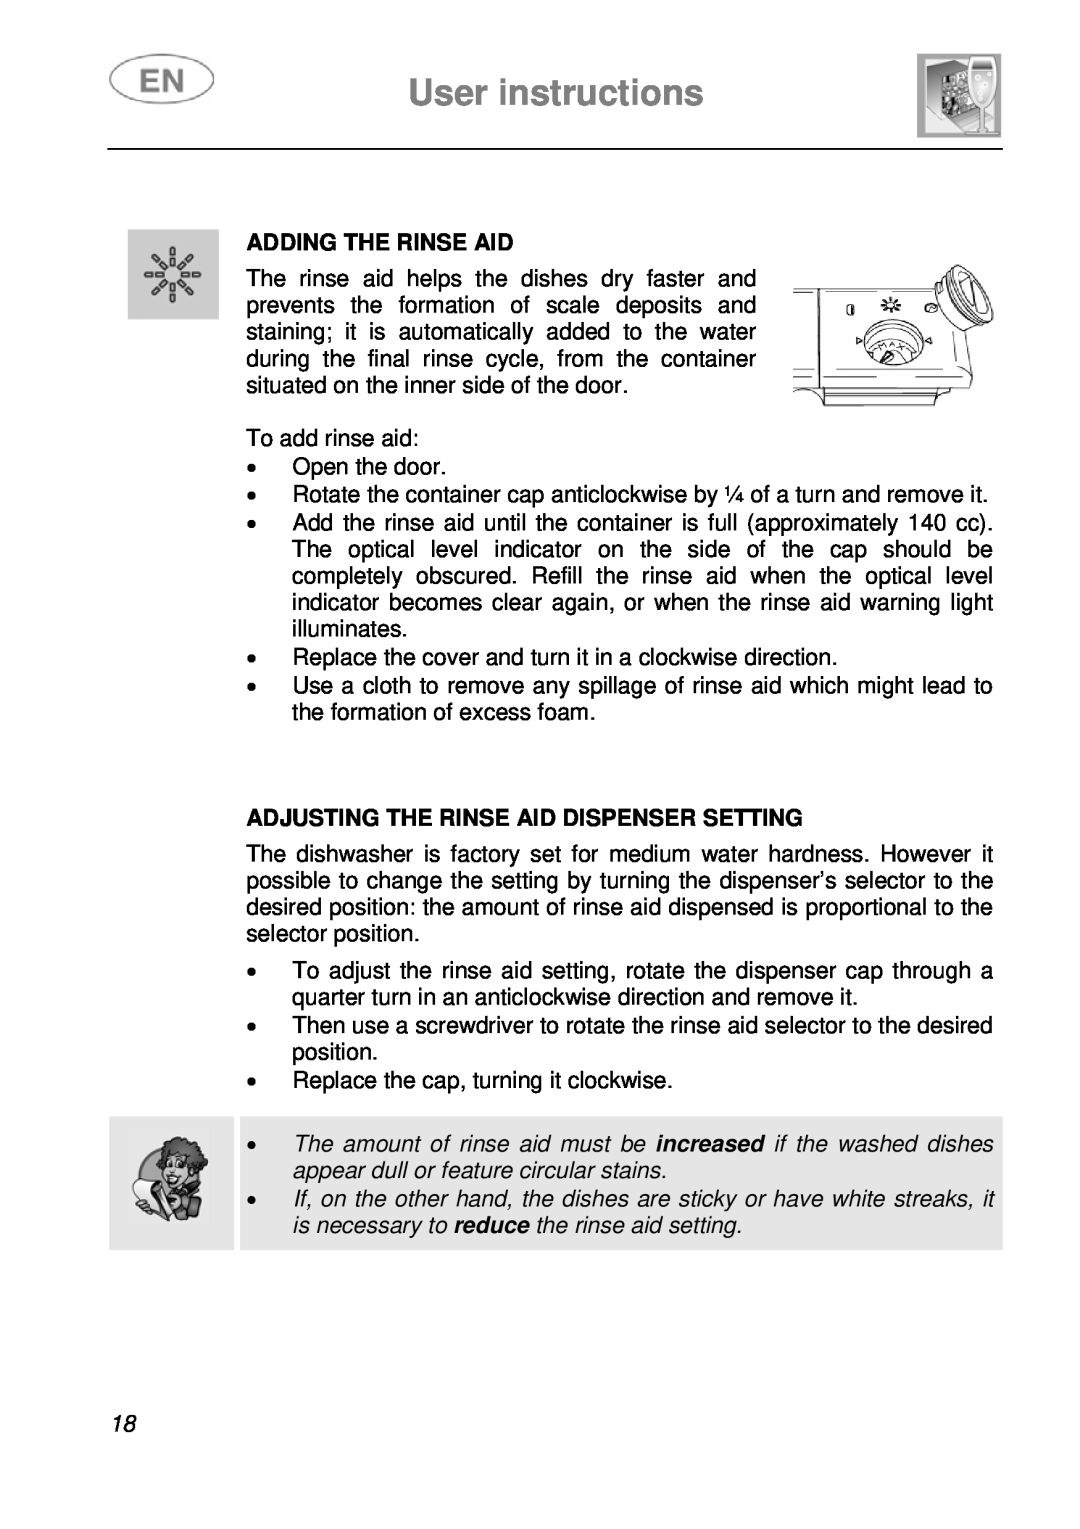 Smeg ST115S instruction manual User instructions, Adding The Rinse Aid, Adjusting The Rinse Aid Dispenser Setting 